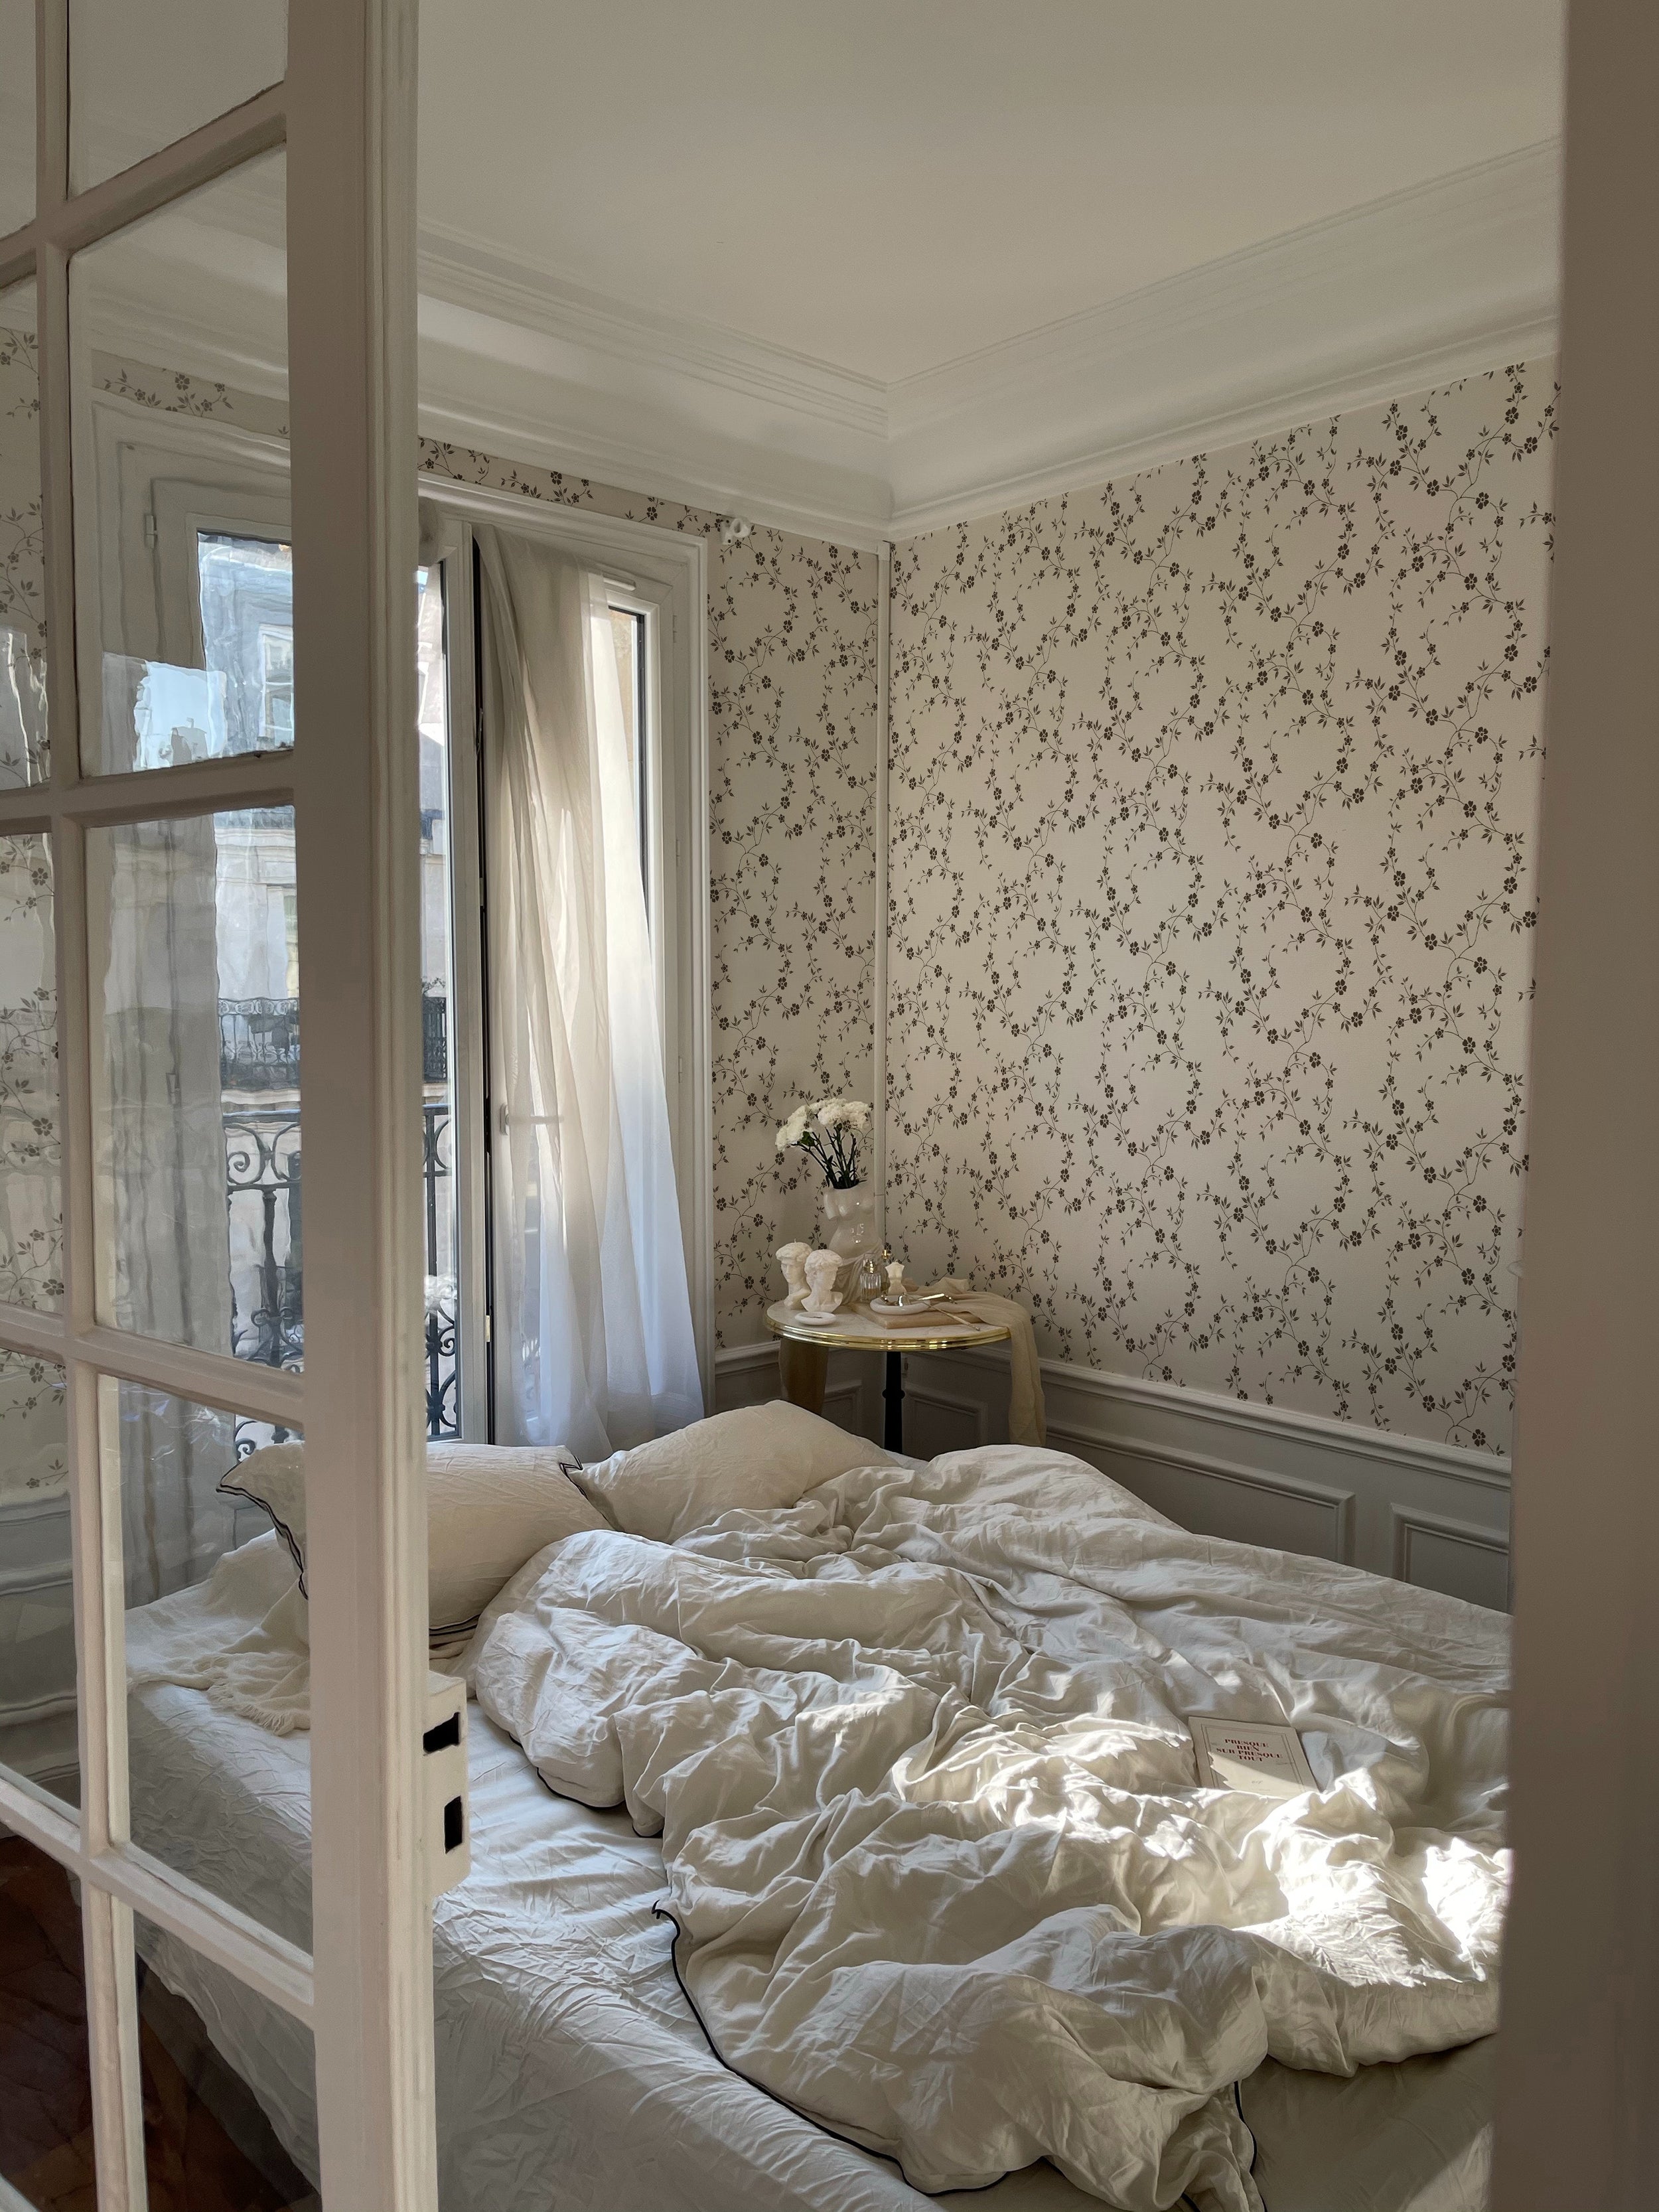 A cozy bedroom scene where the Charming Floral Wallpaper in Deep Brown provides a delicate backdrop. The natural light from a window illuminates the floral pattern, enhancing the room's vintage charm, complete with a classic bed and soft, inviting linens.